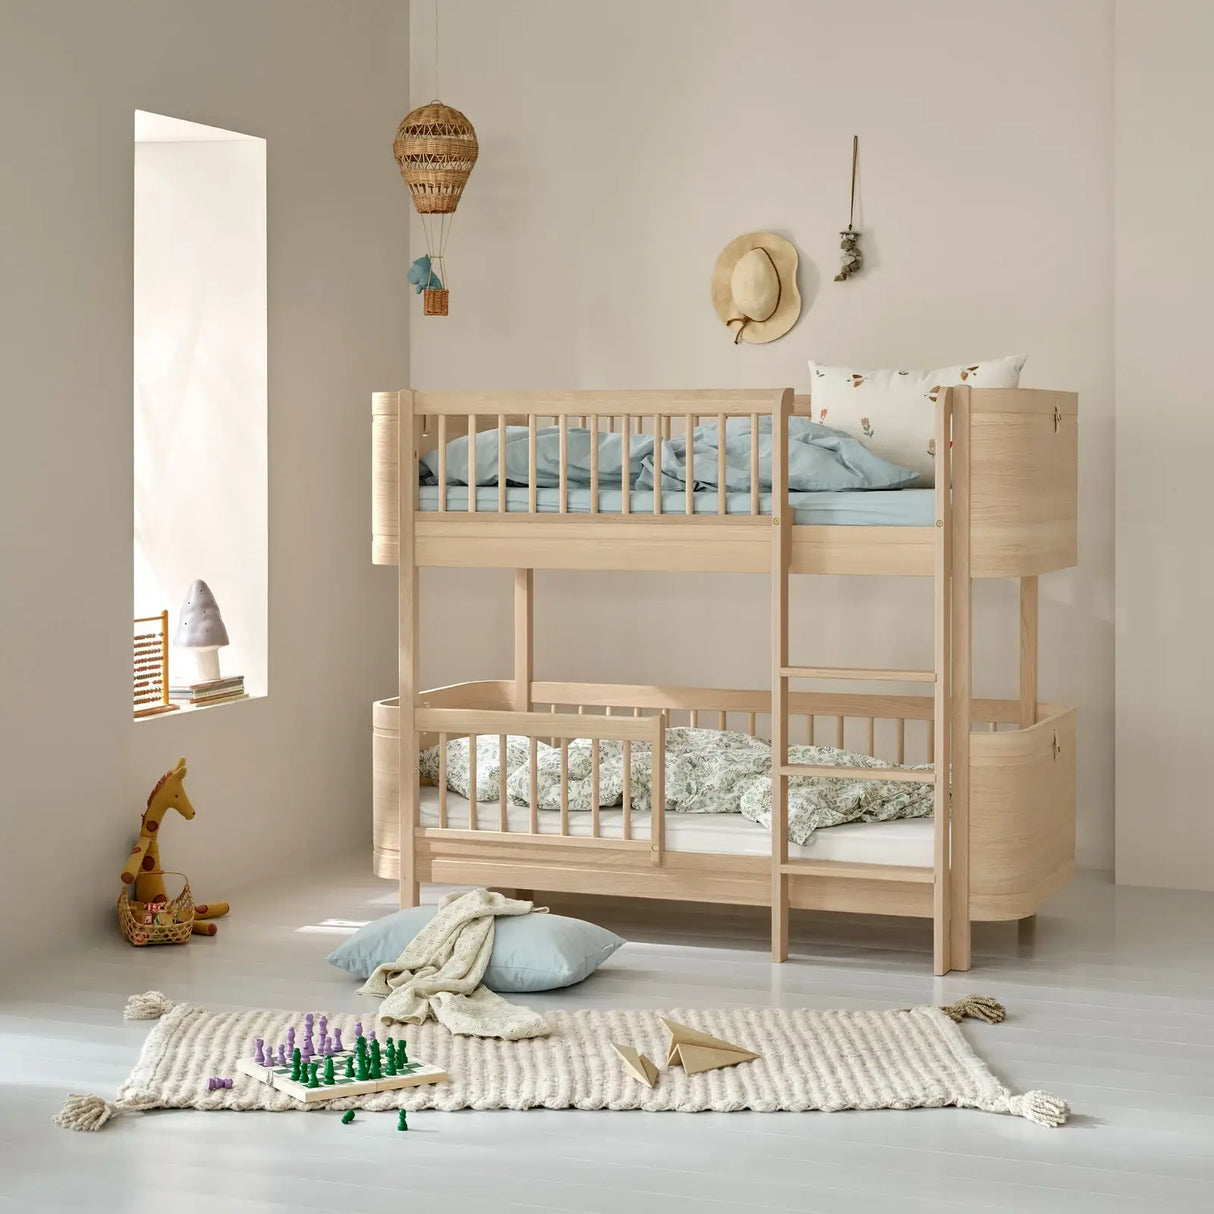 FREE Installation - Oliver Furniture Wood Mini+ Low Bunk Bed in Oak - Little Snoozes